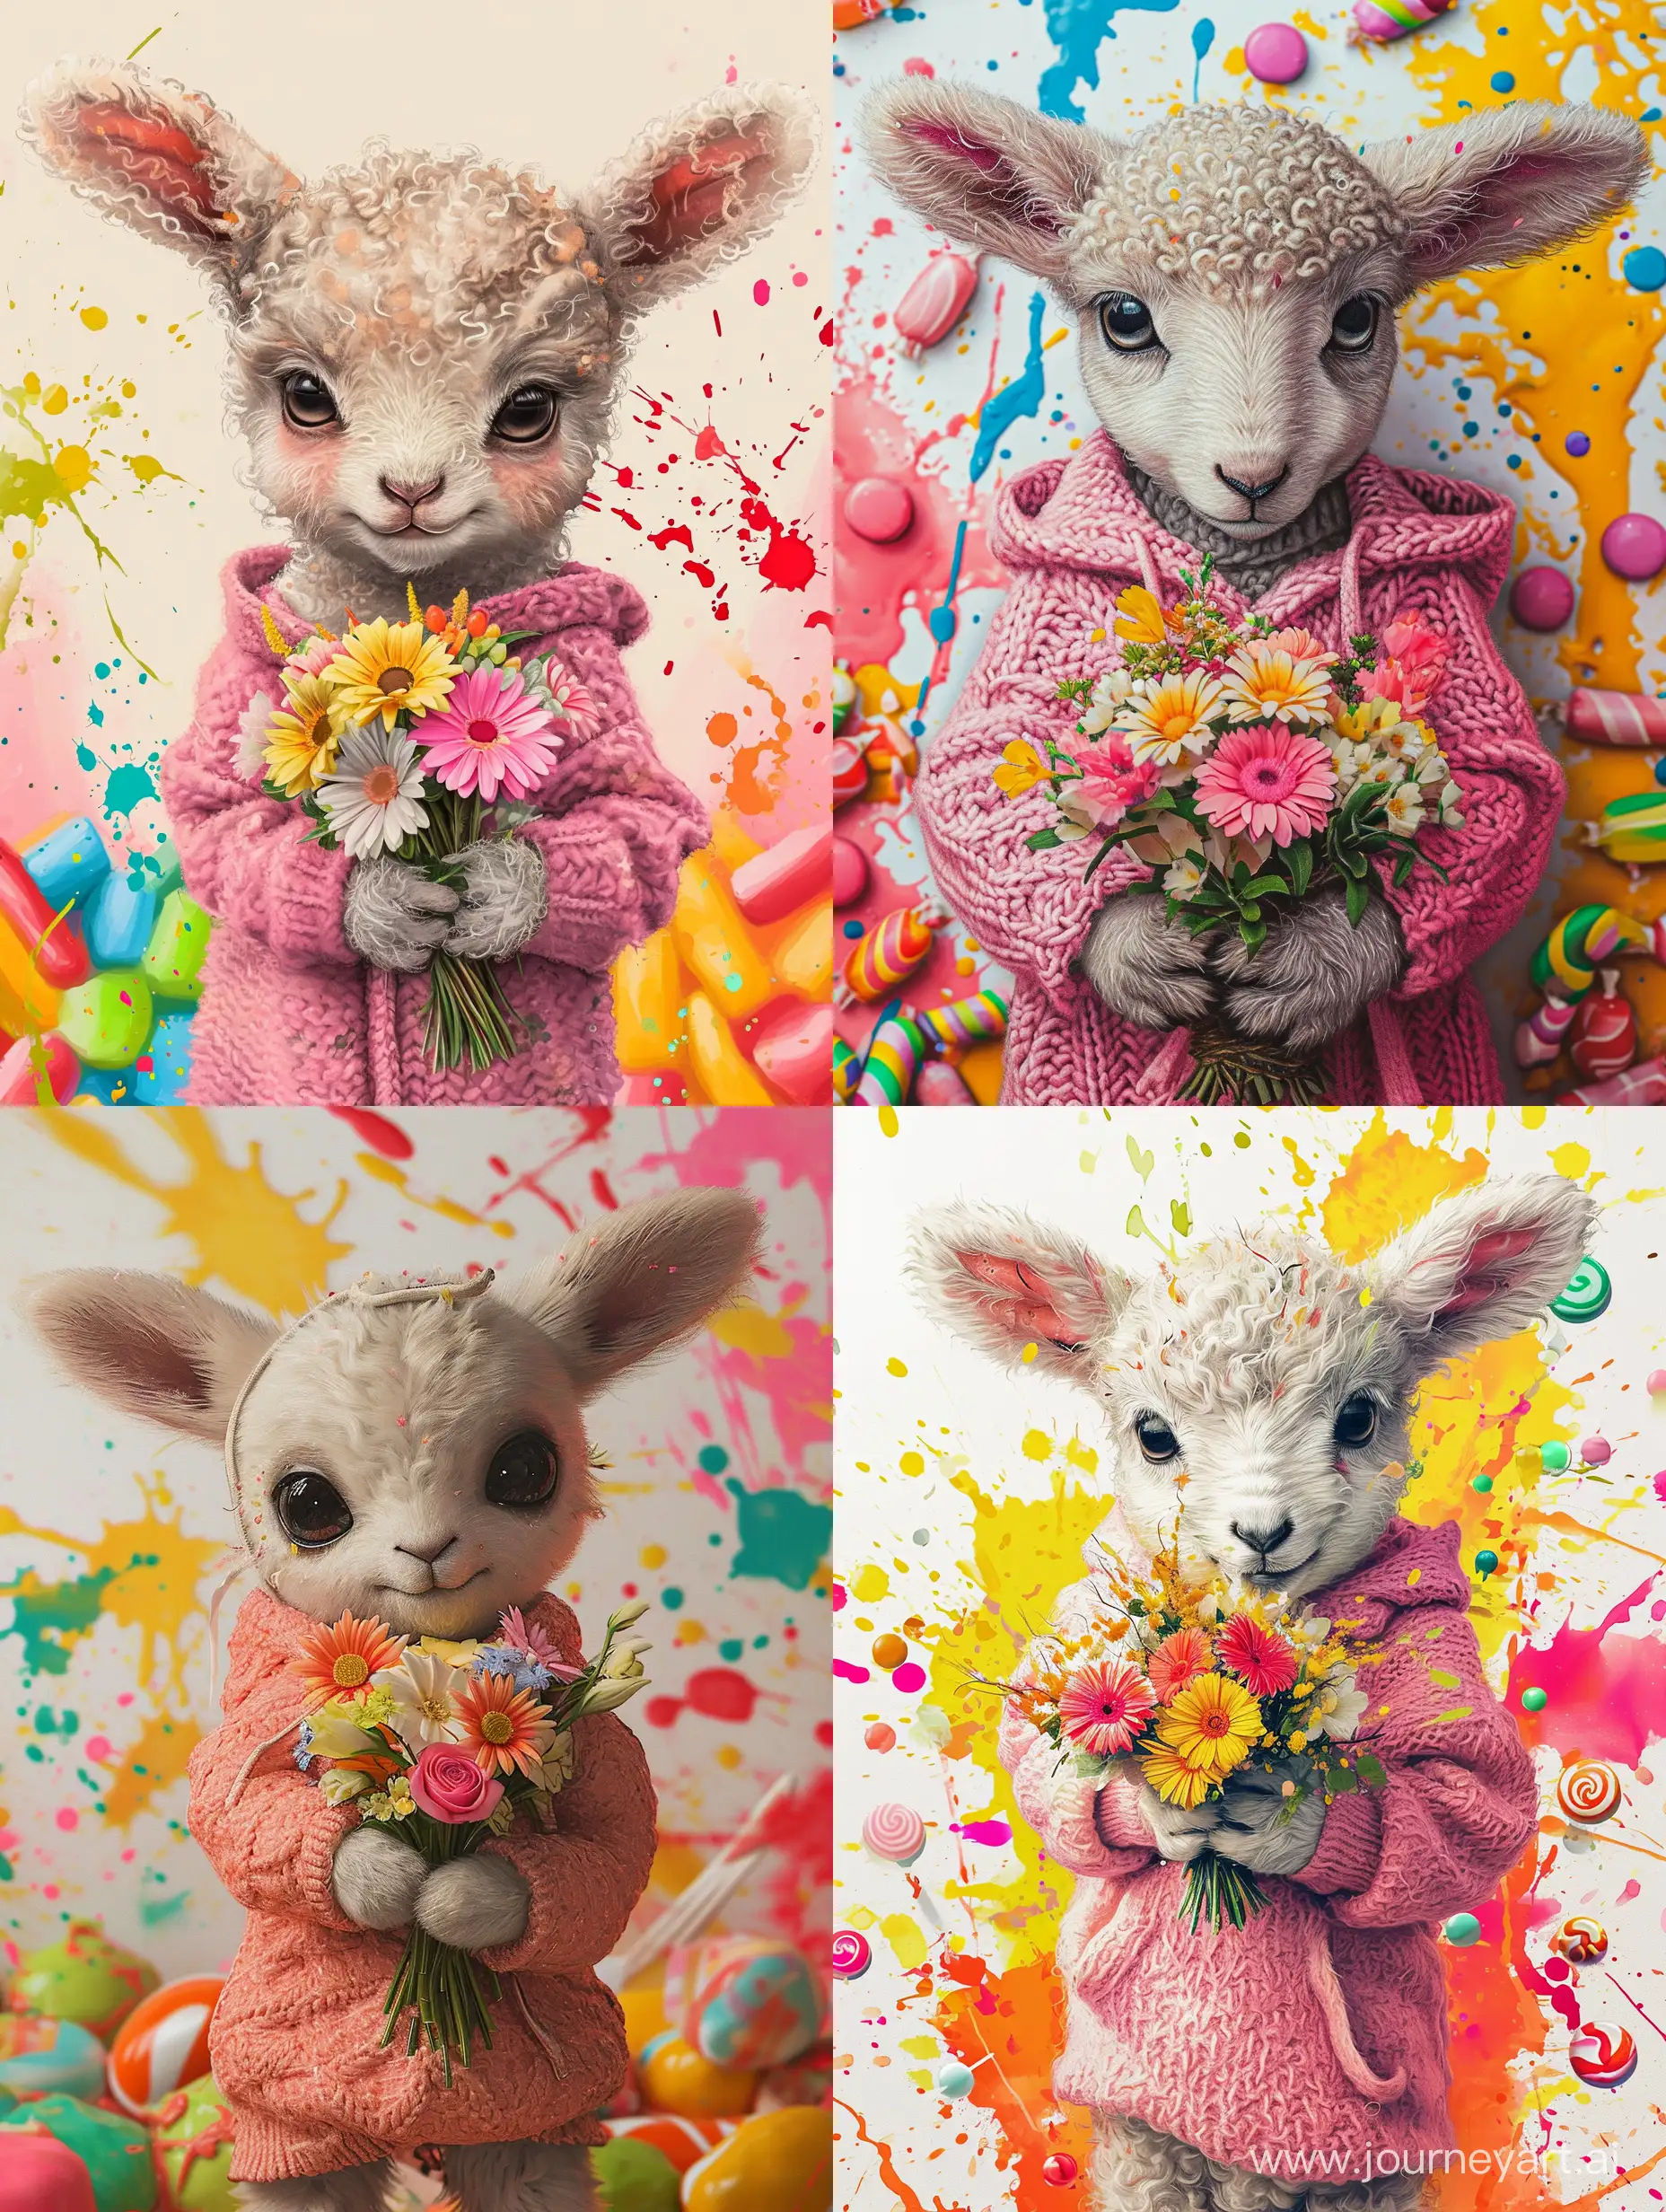 Adorable-Tiny-Lamb-Cub-with-Bouquet-in-Knitted-Pink-Hoodie